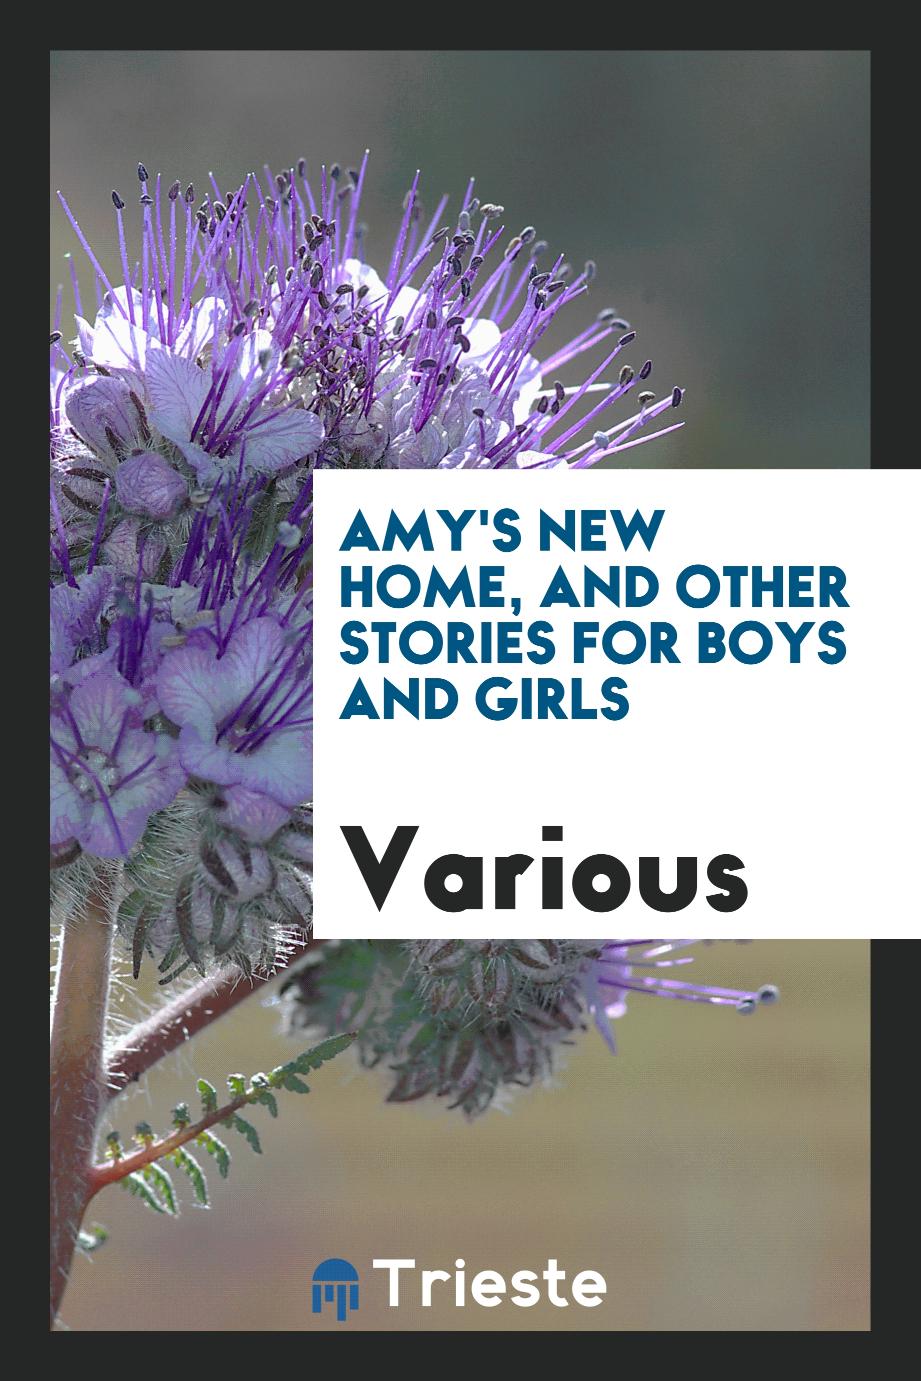 Amy's new home, and other stories for boys and girls